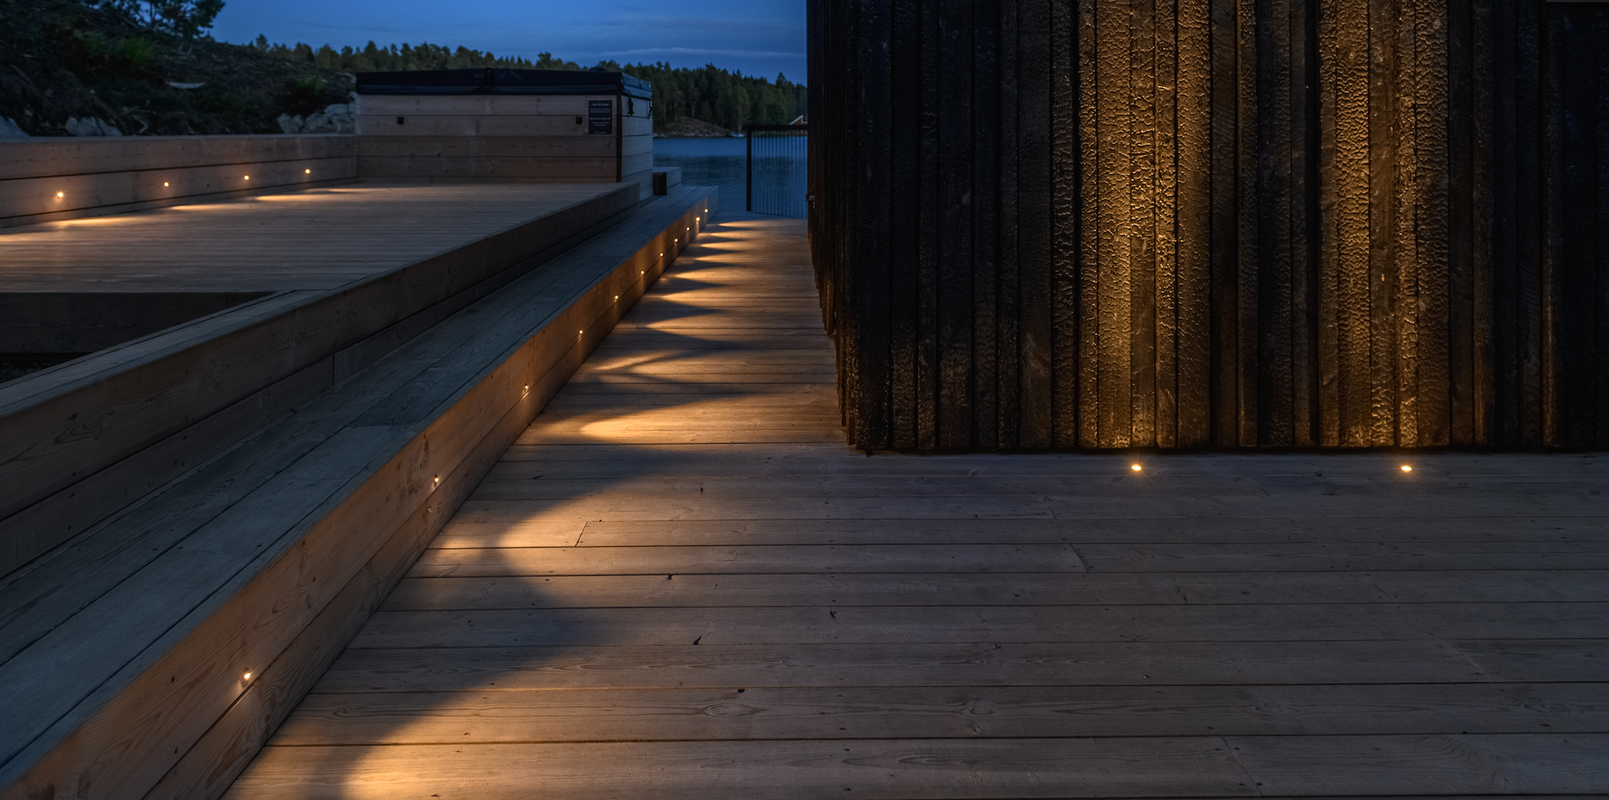 A structure and dock illuminated with lights